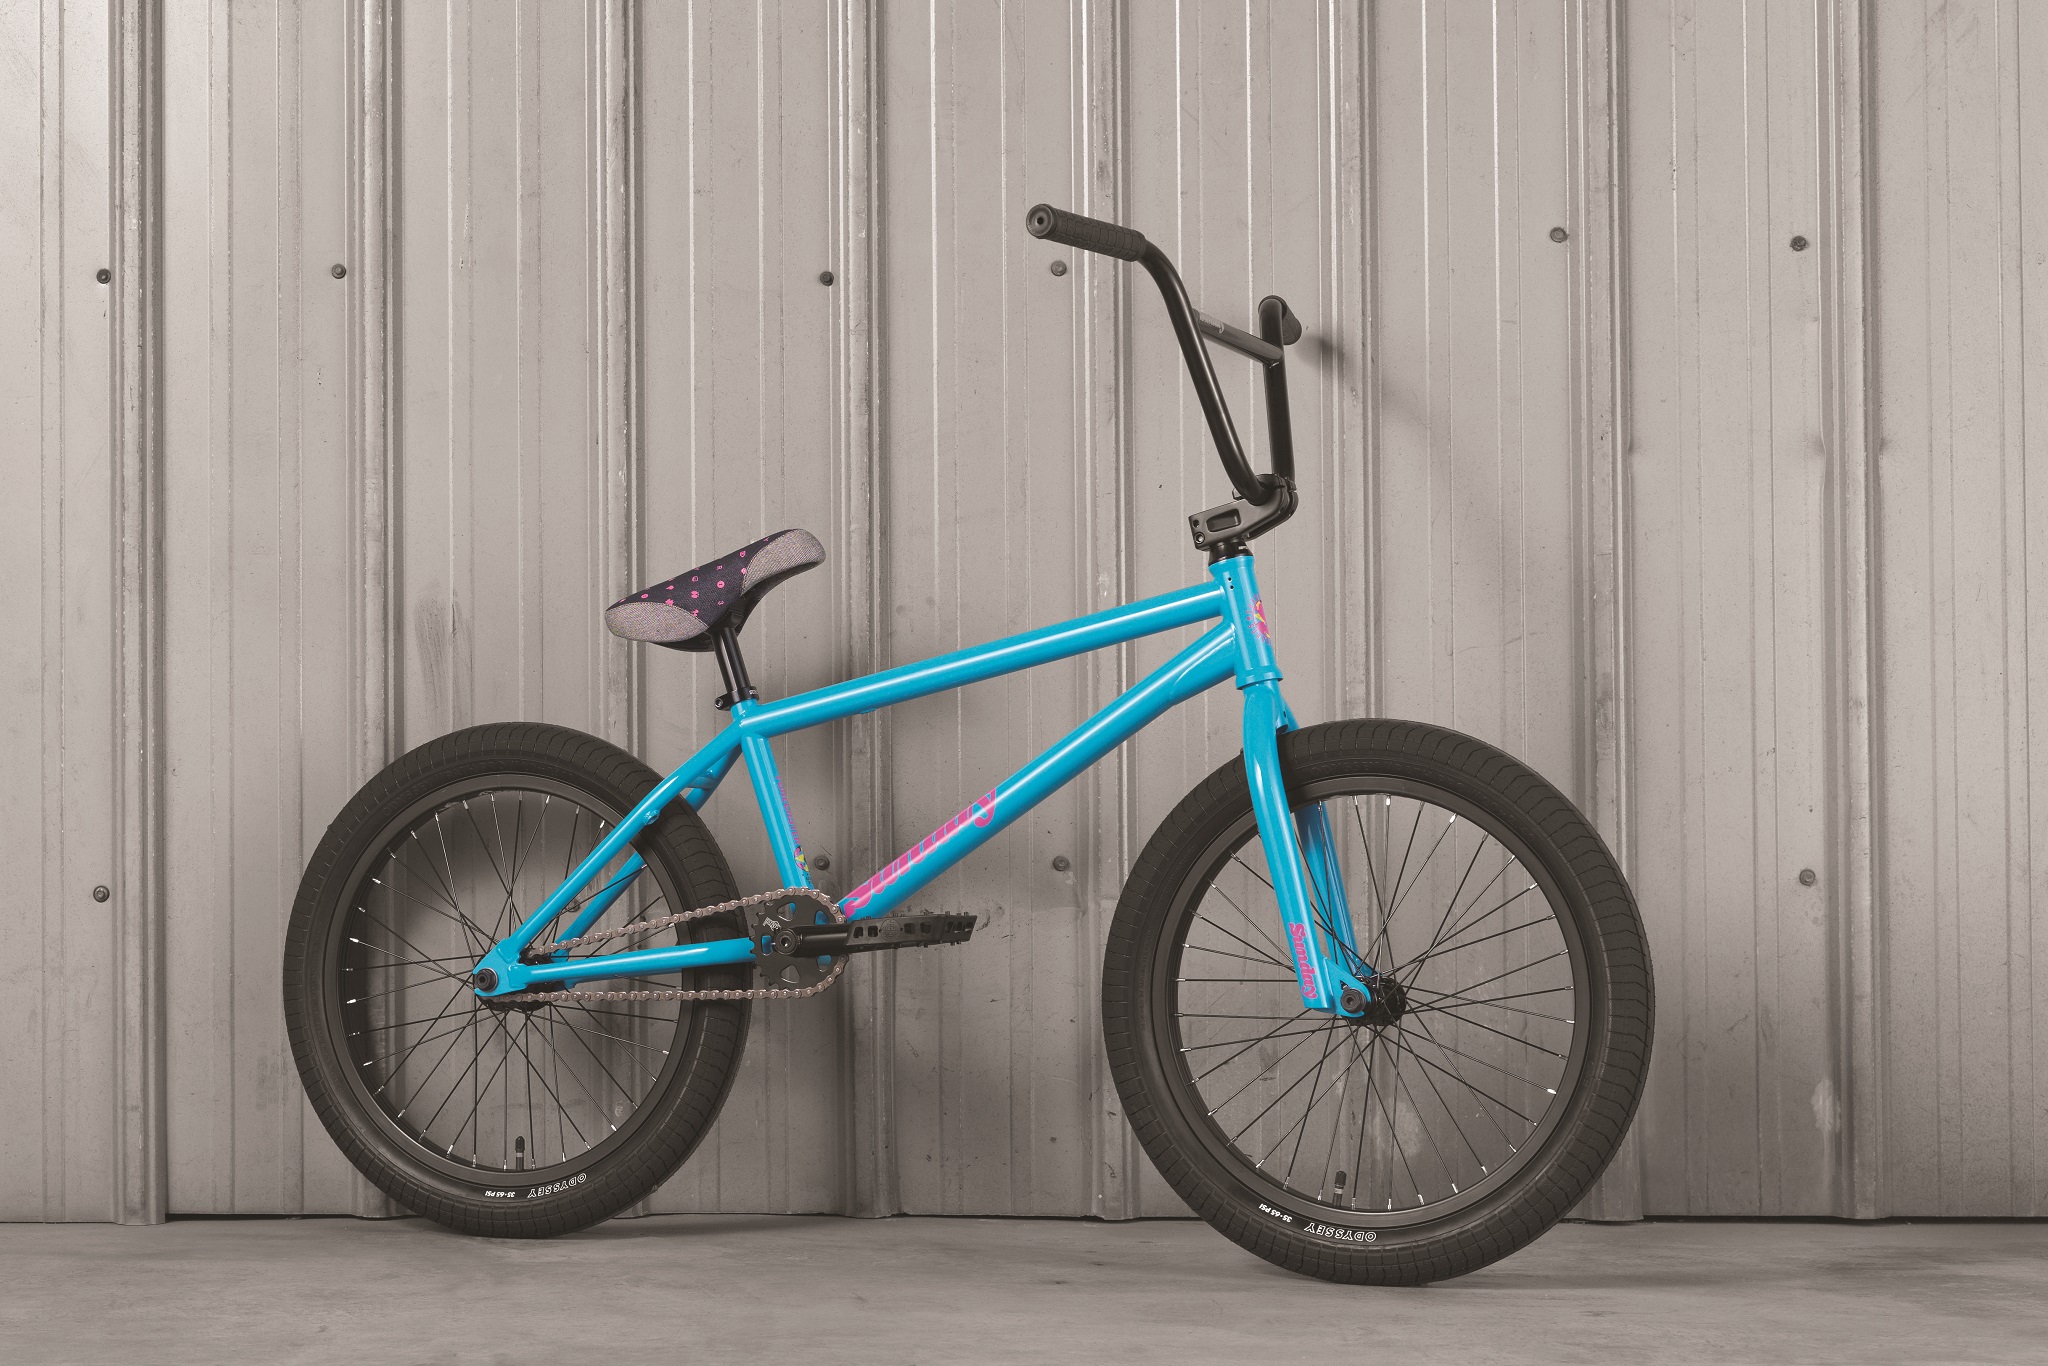 Forecaster Gloss Ocean Blue Aaron Ross Signature - Top Tube: 20.5" - Odyssey Freecoaster